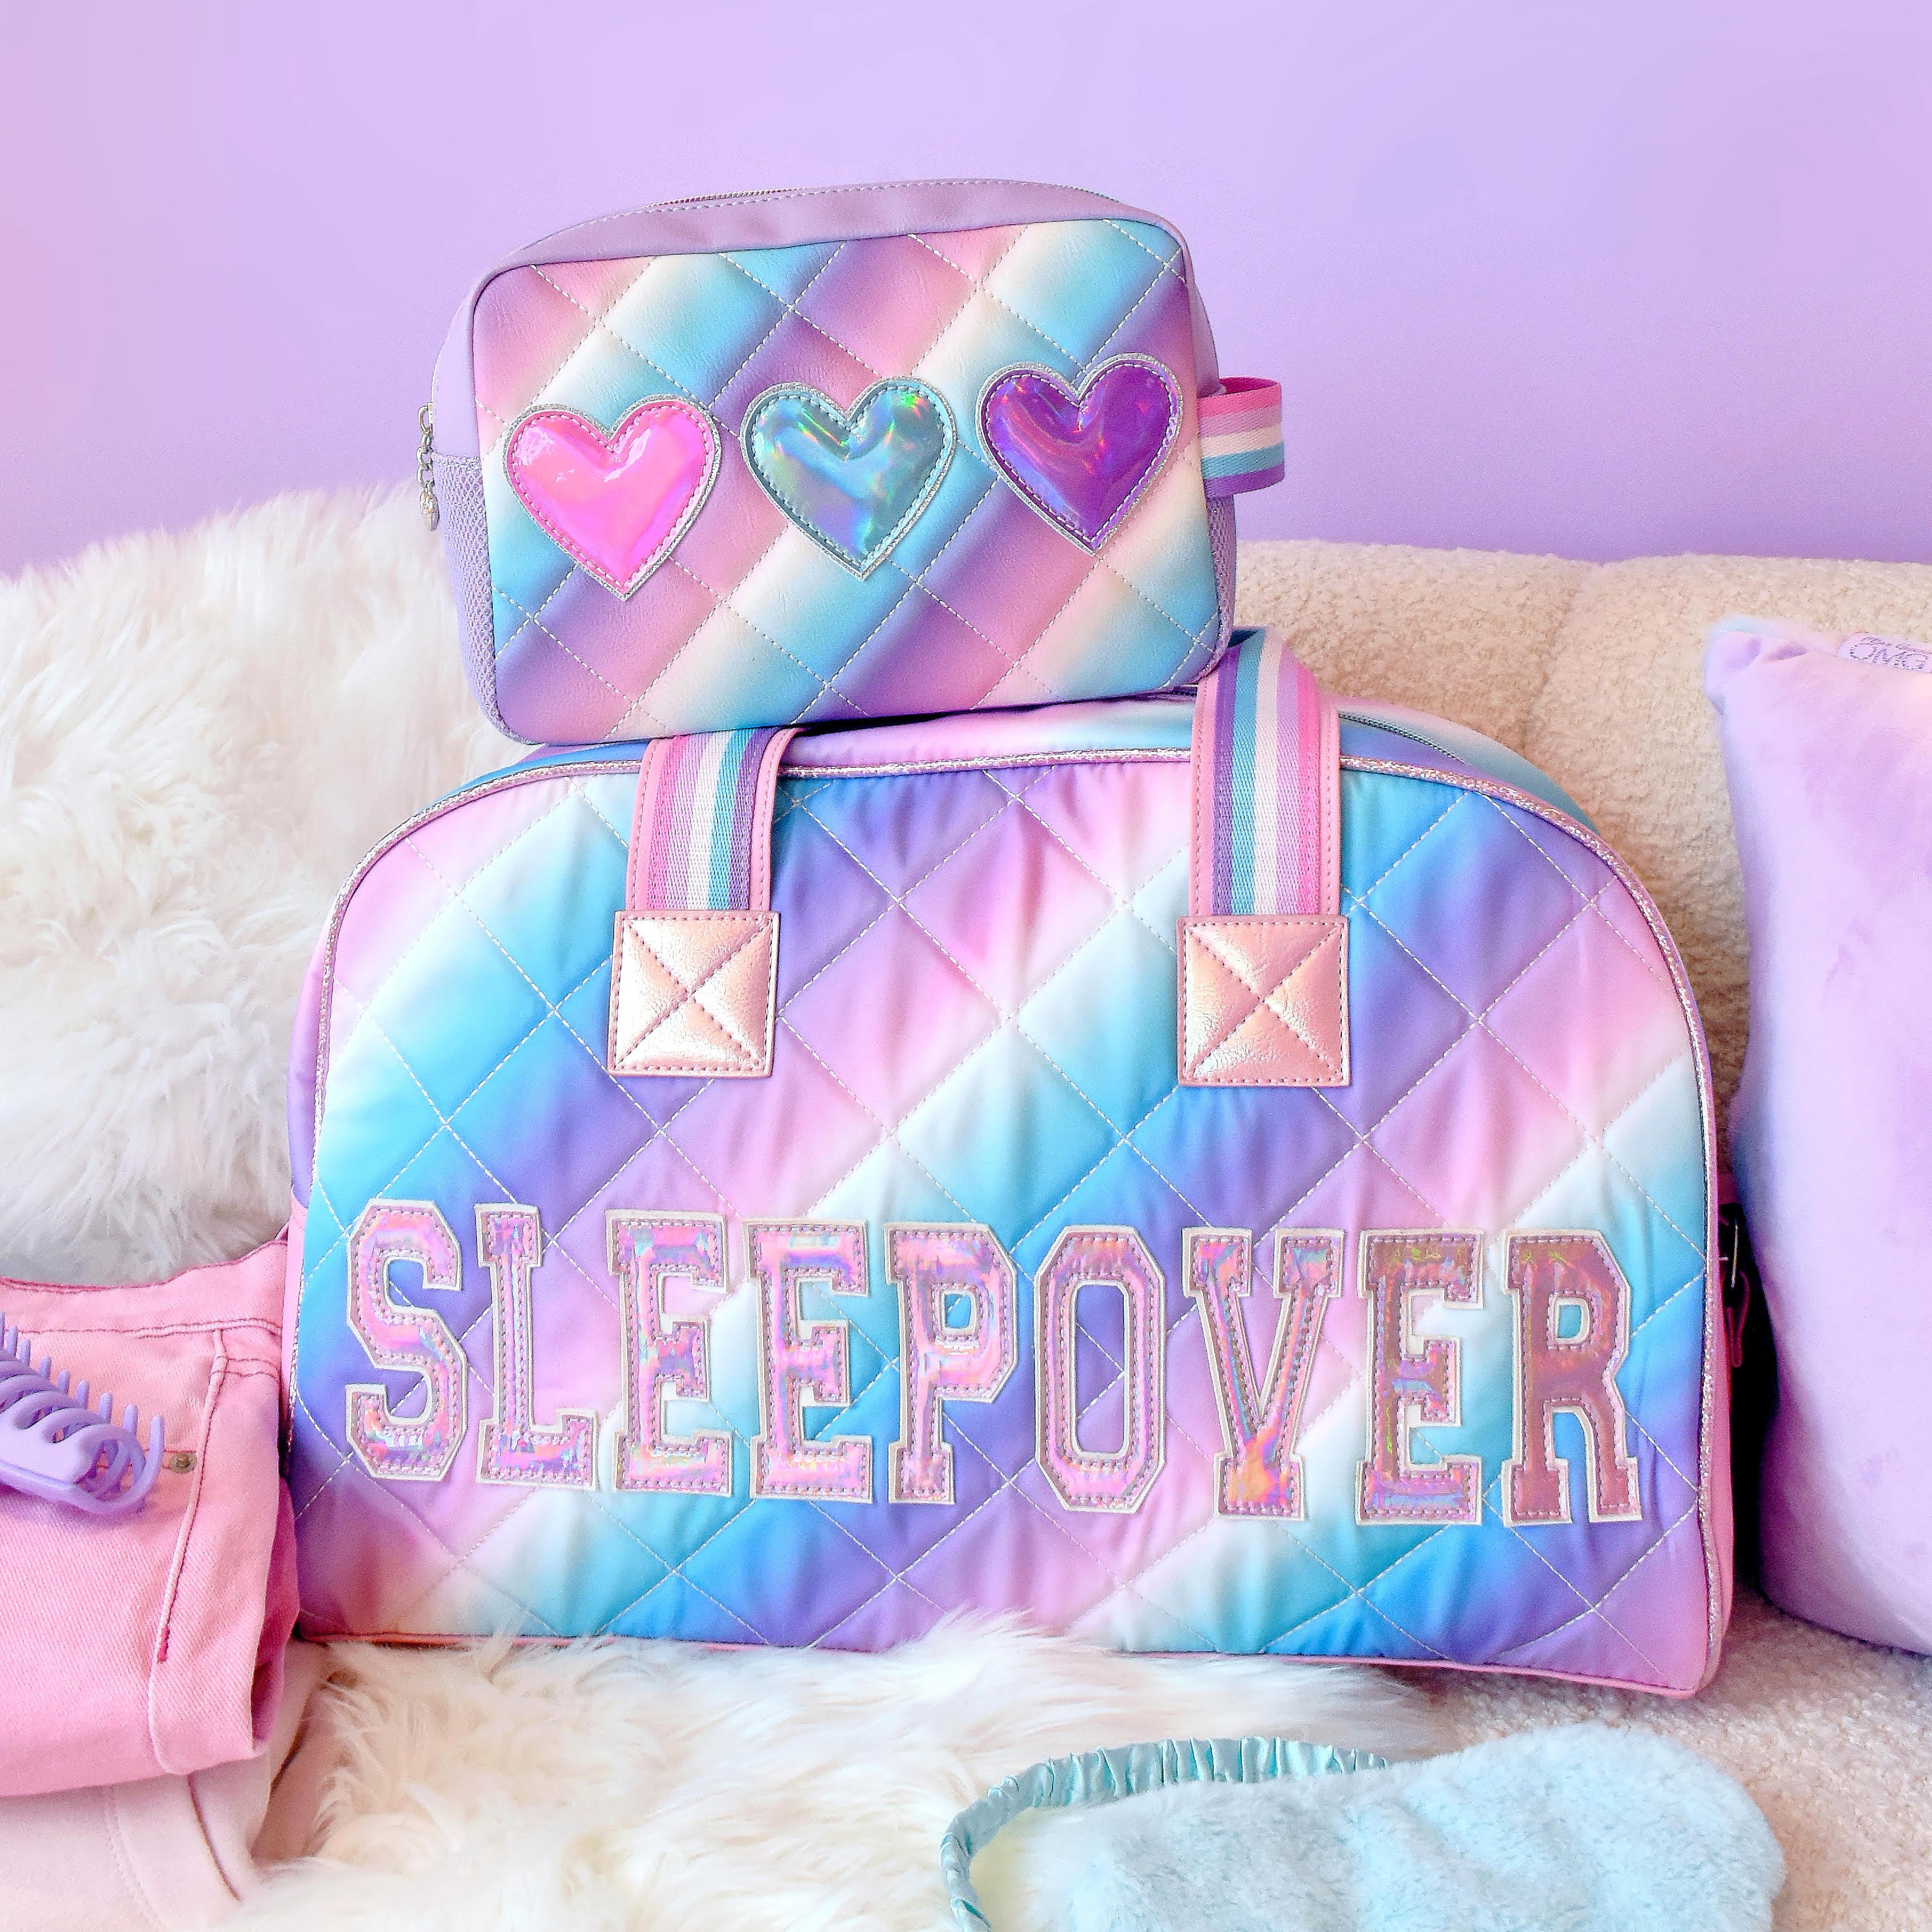 Photo of Sleeepover Duffle Bag and Heart Print Pouch